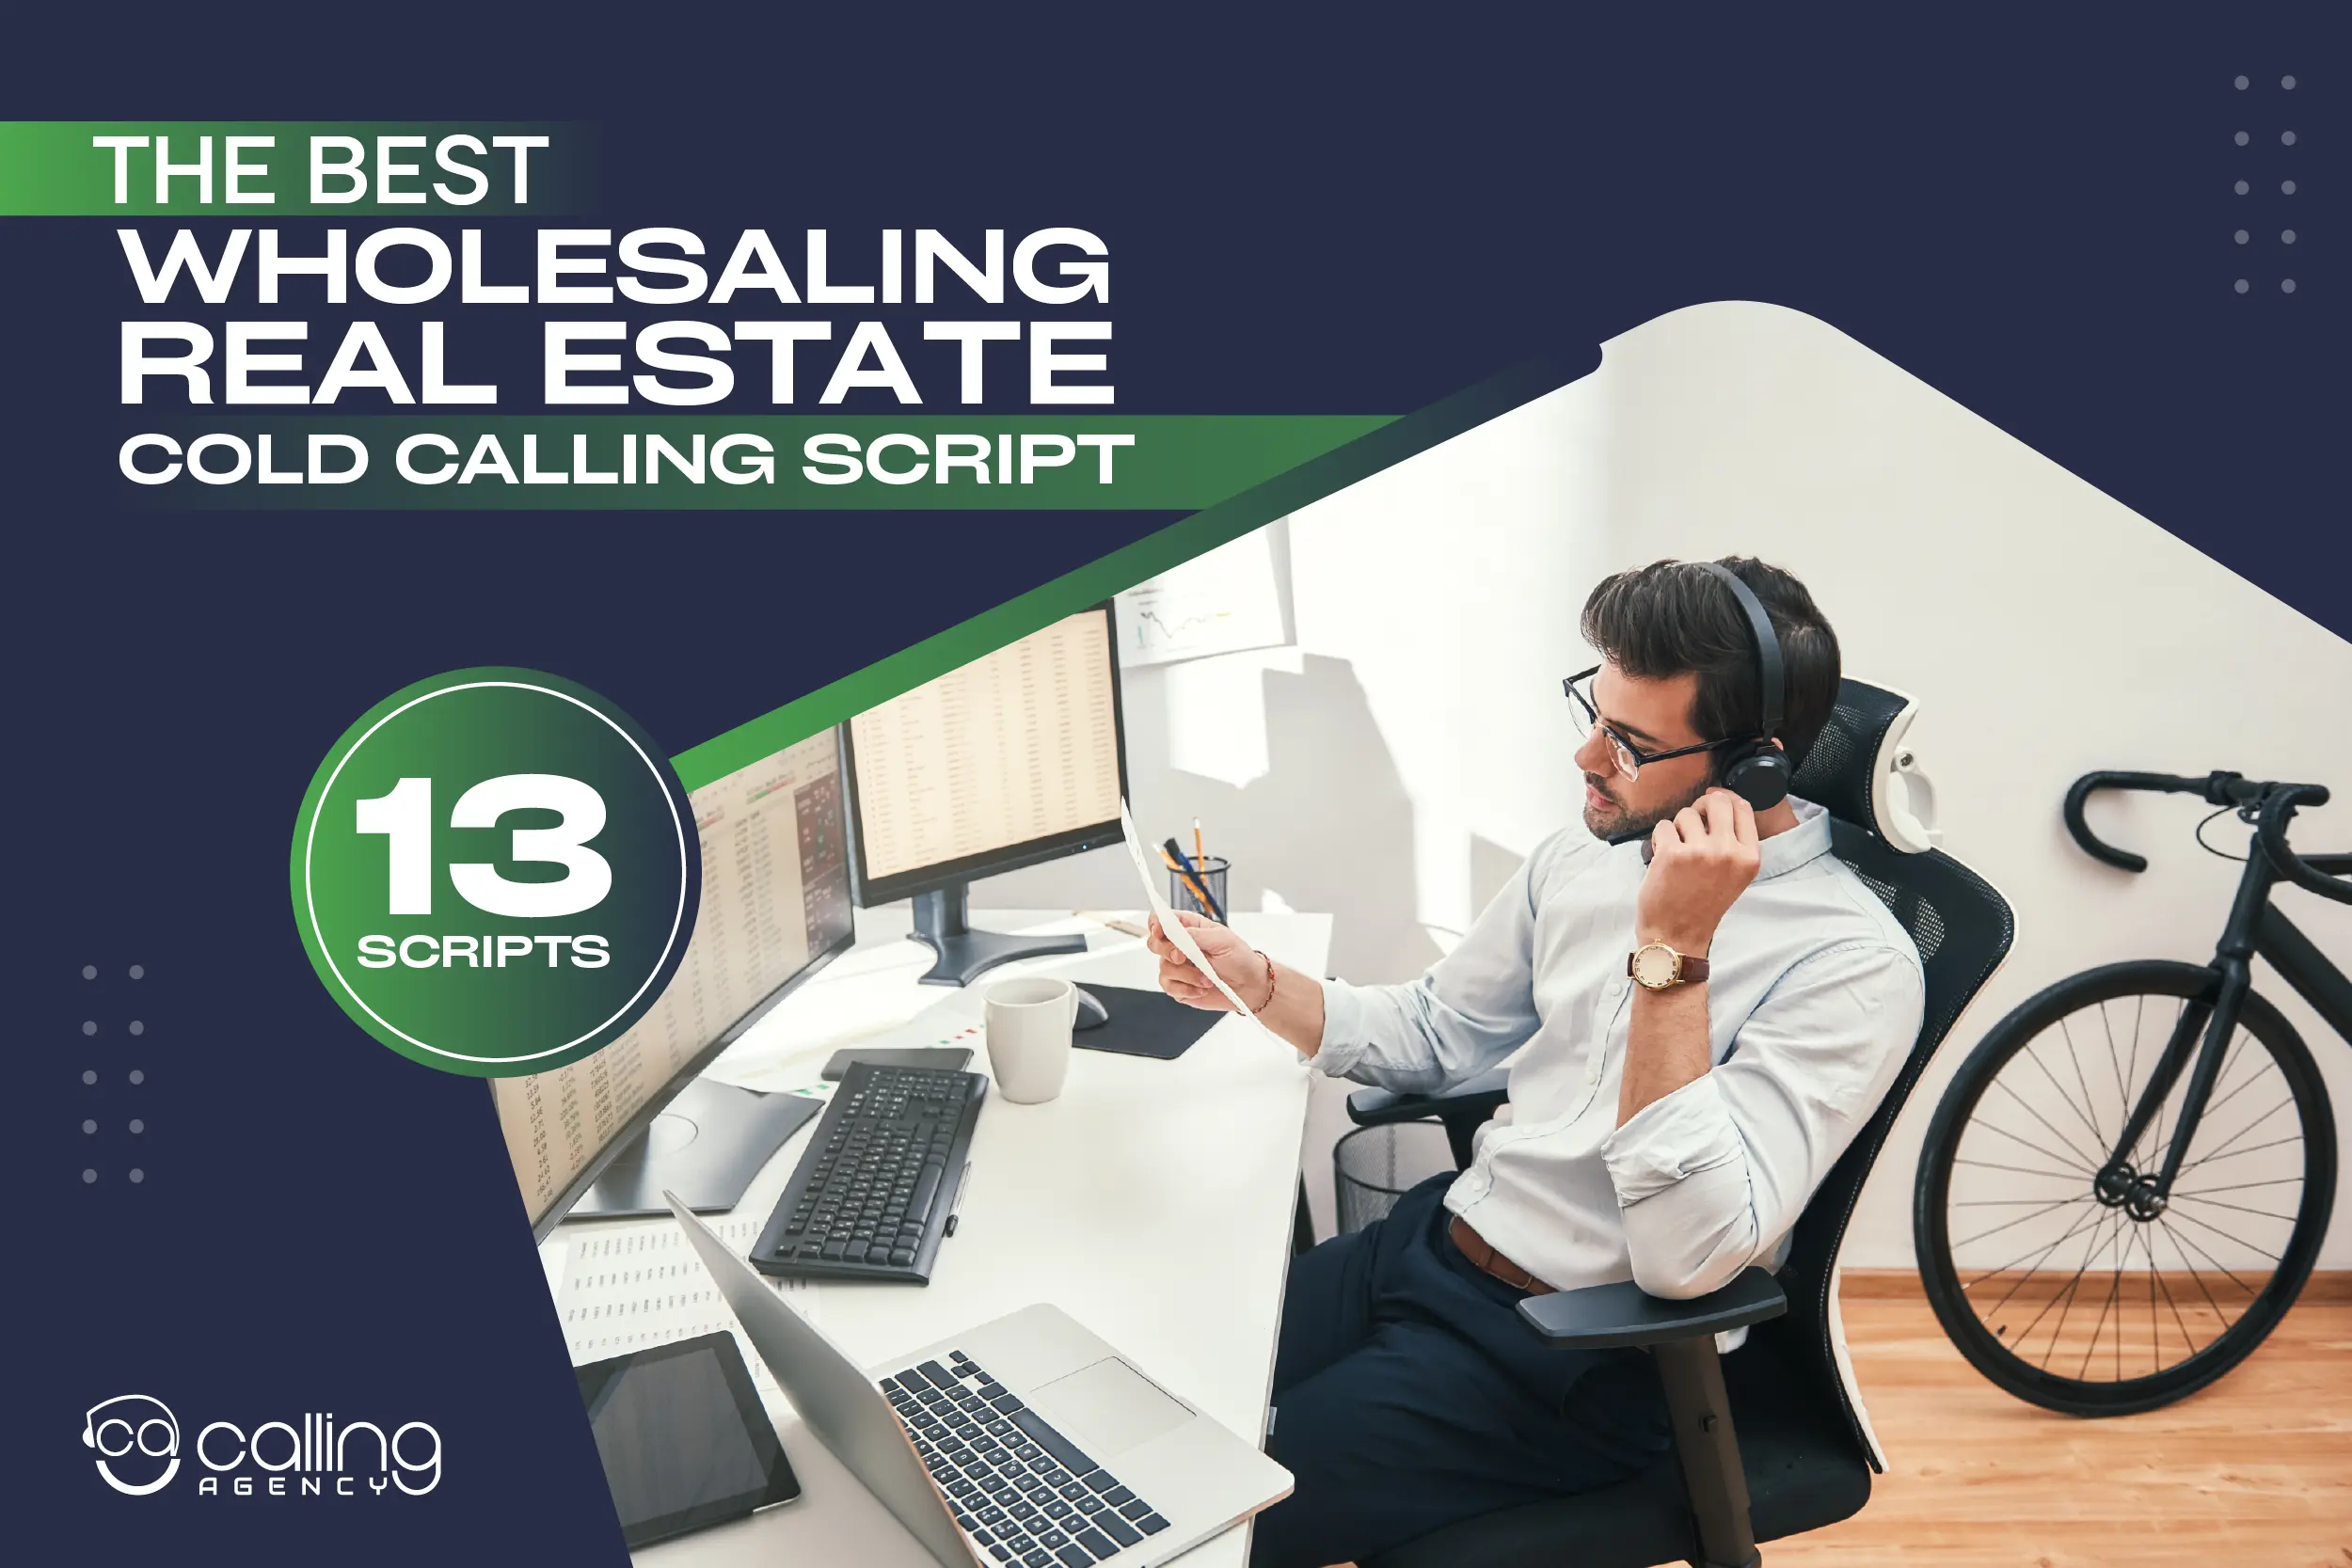 The BEST Wholesaling Cold Calling Script